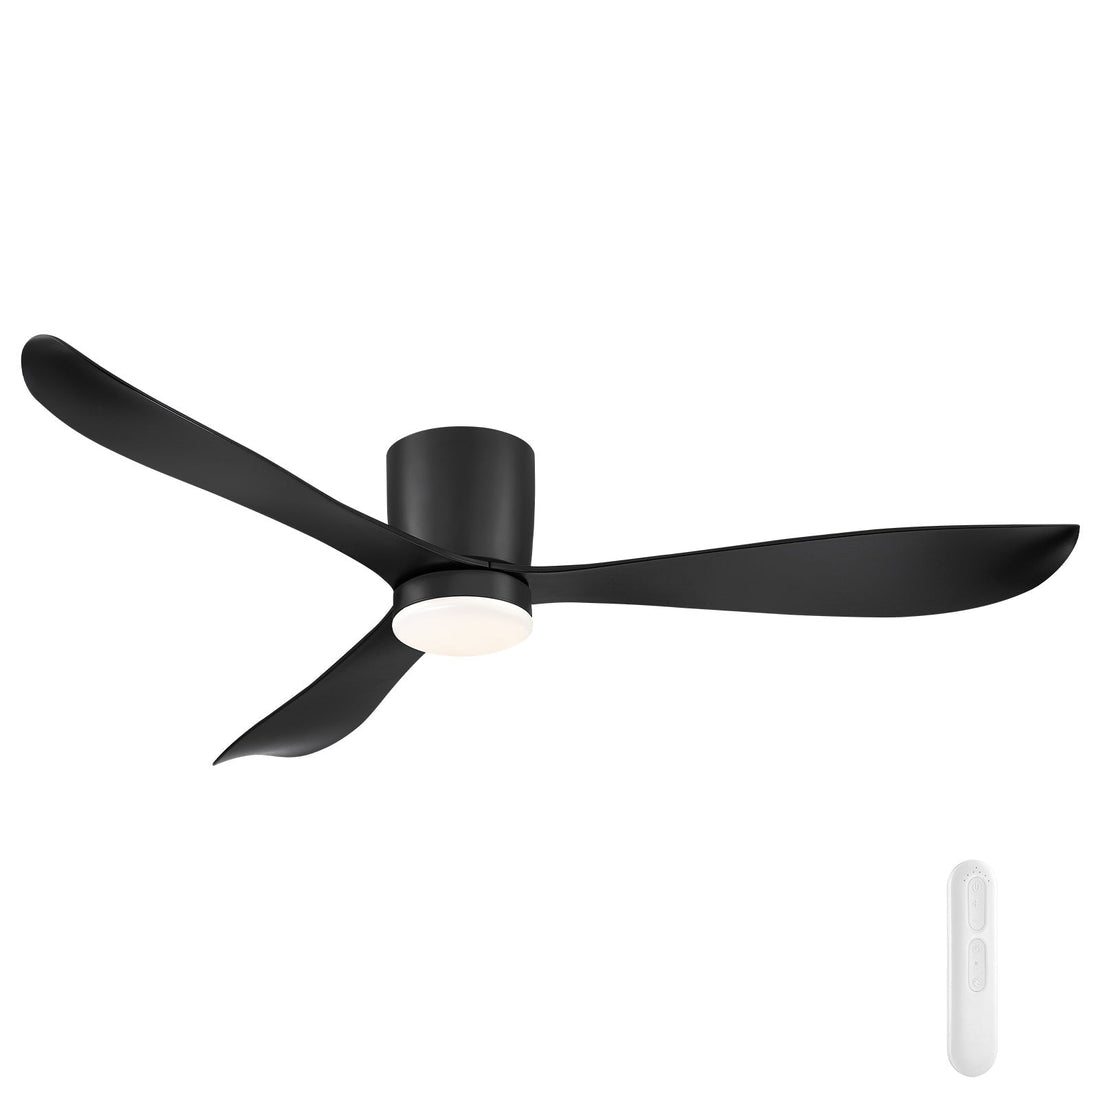 Instinct DC Ceiling Fan with LED Light and Remote Mercator